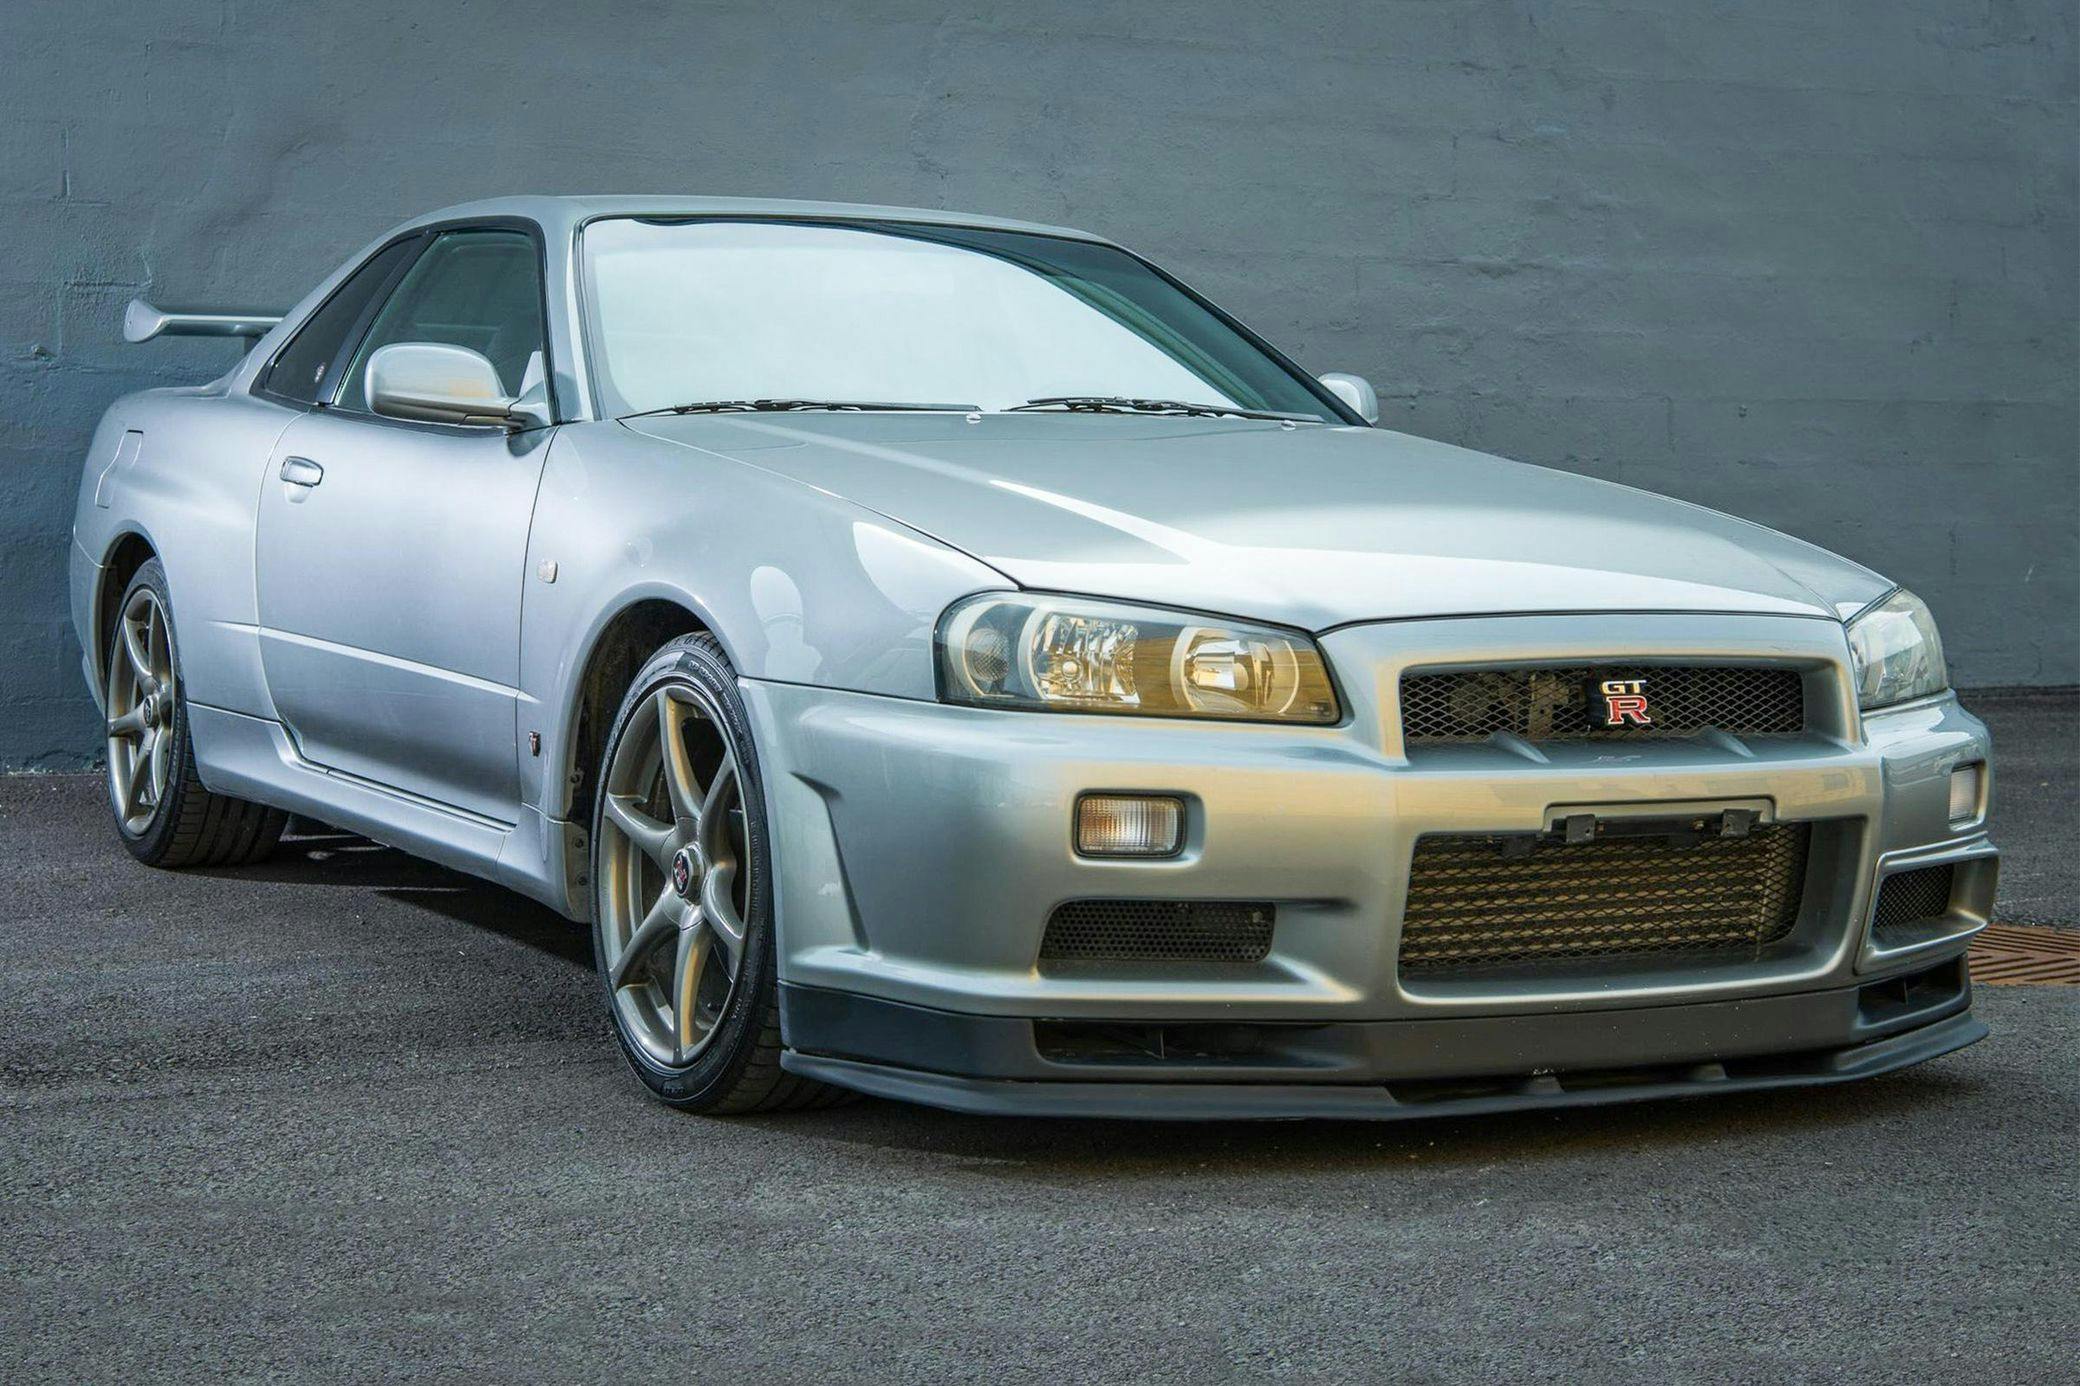 The Nissan GT-R repeats history